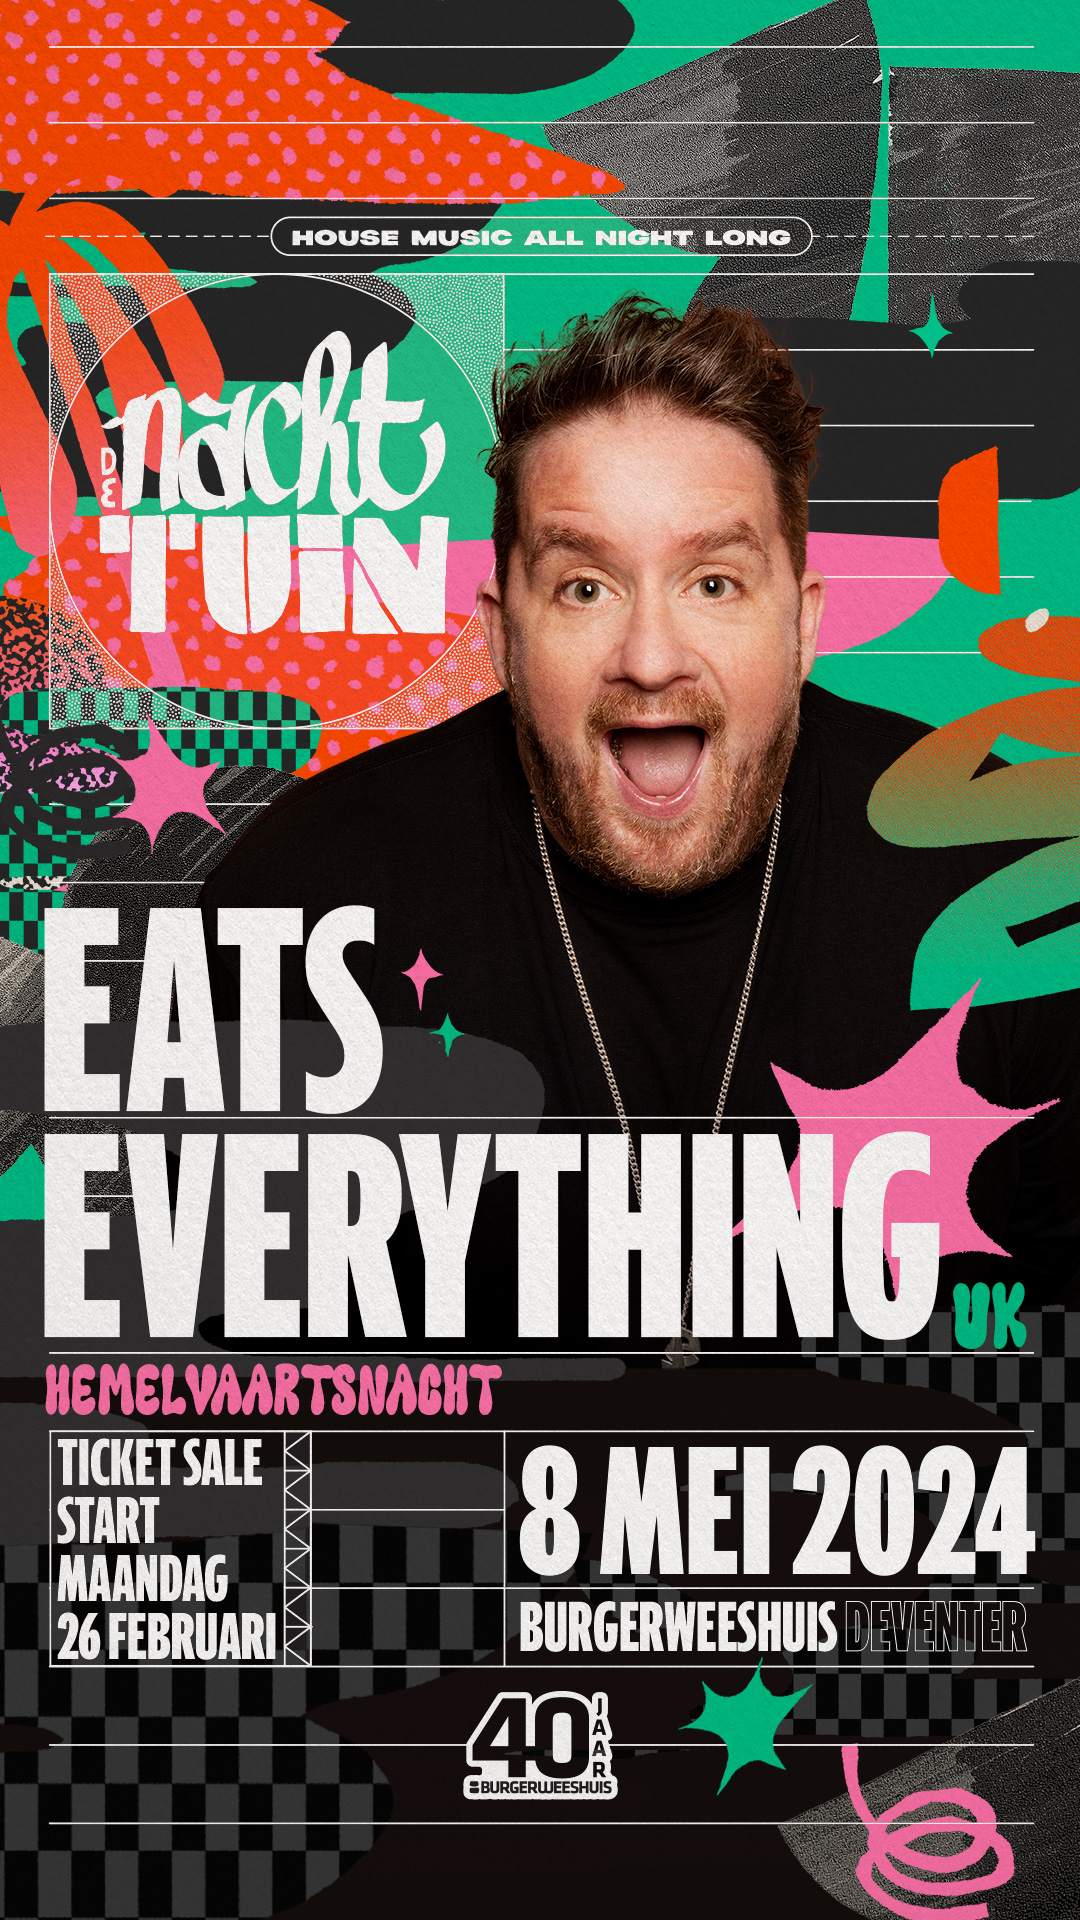 De Nachttuin with EATS EVERYTHING - Página frontal